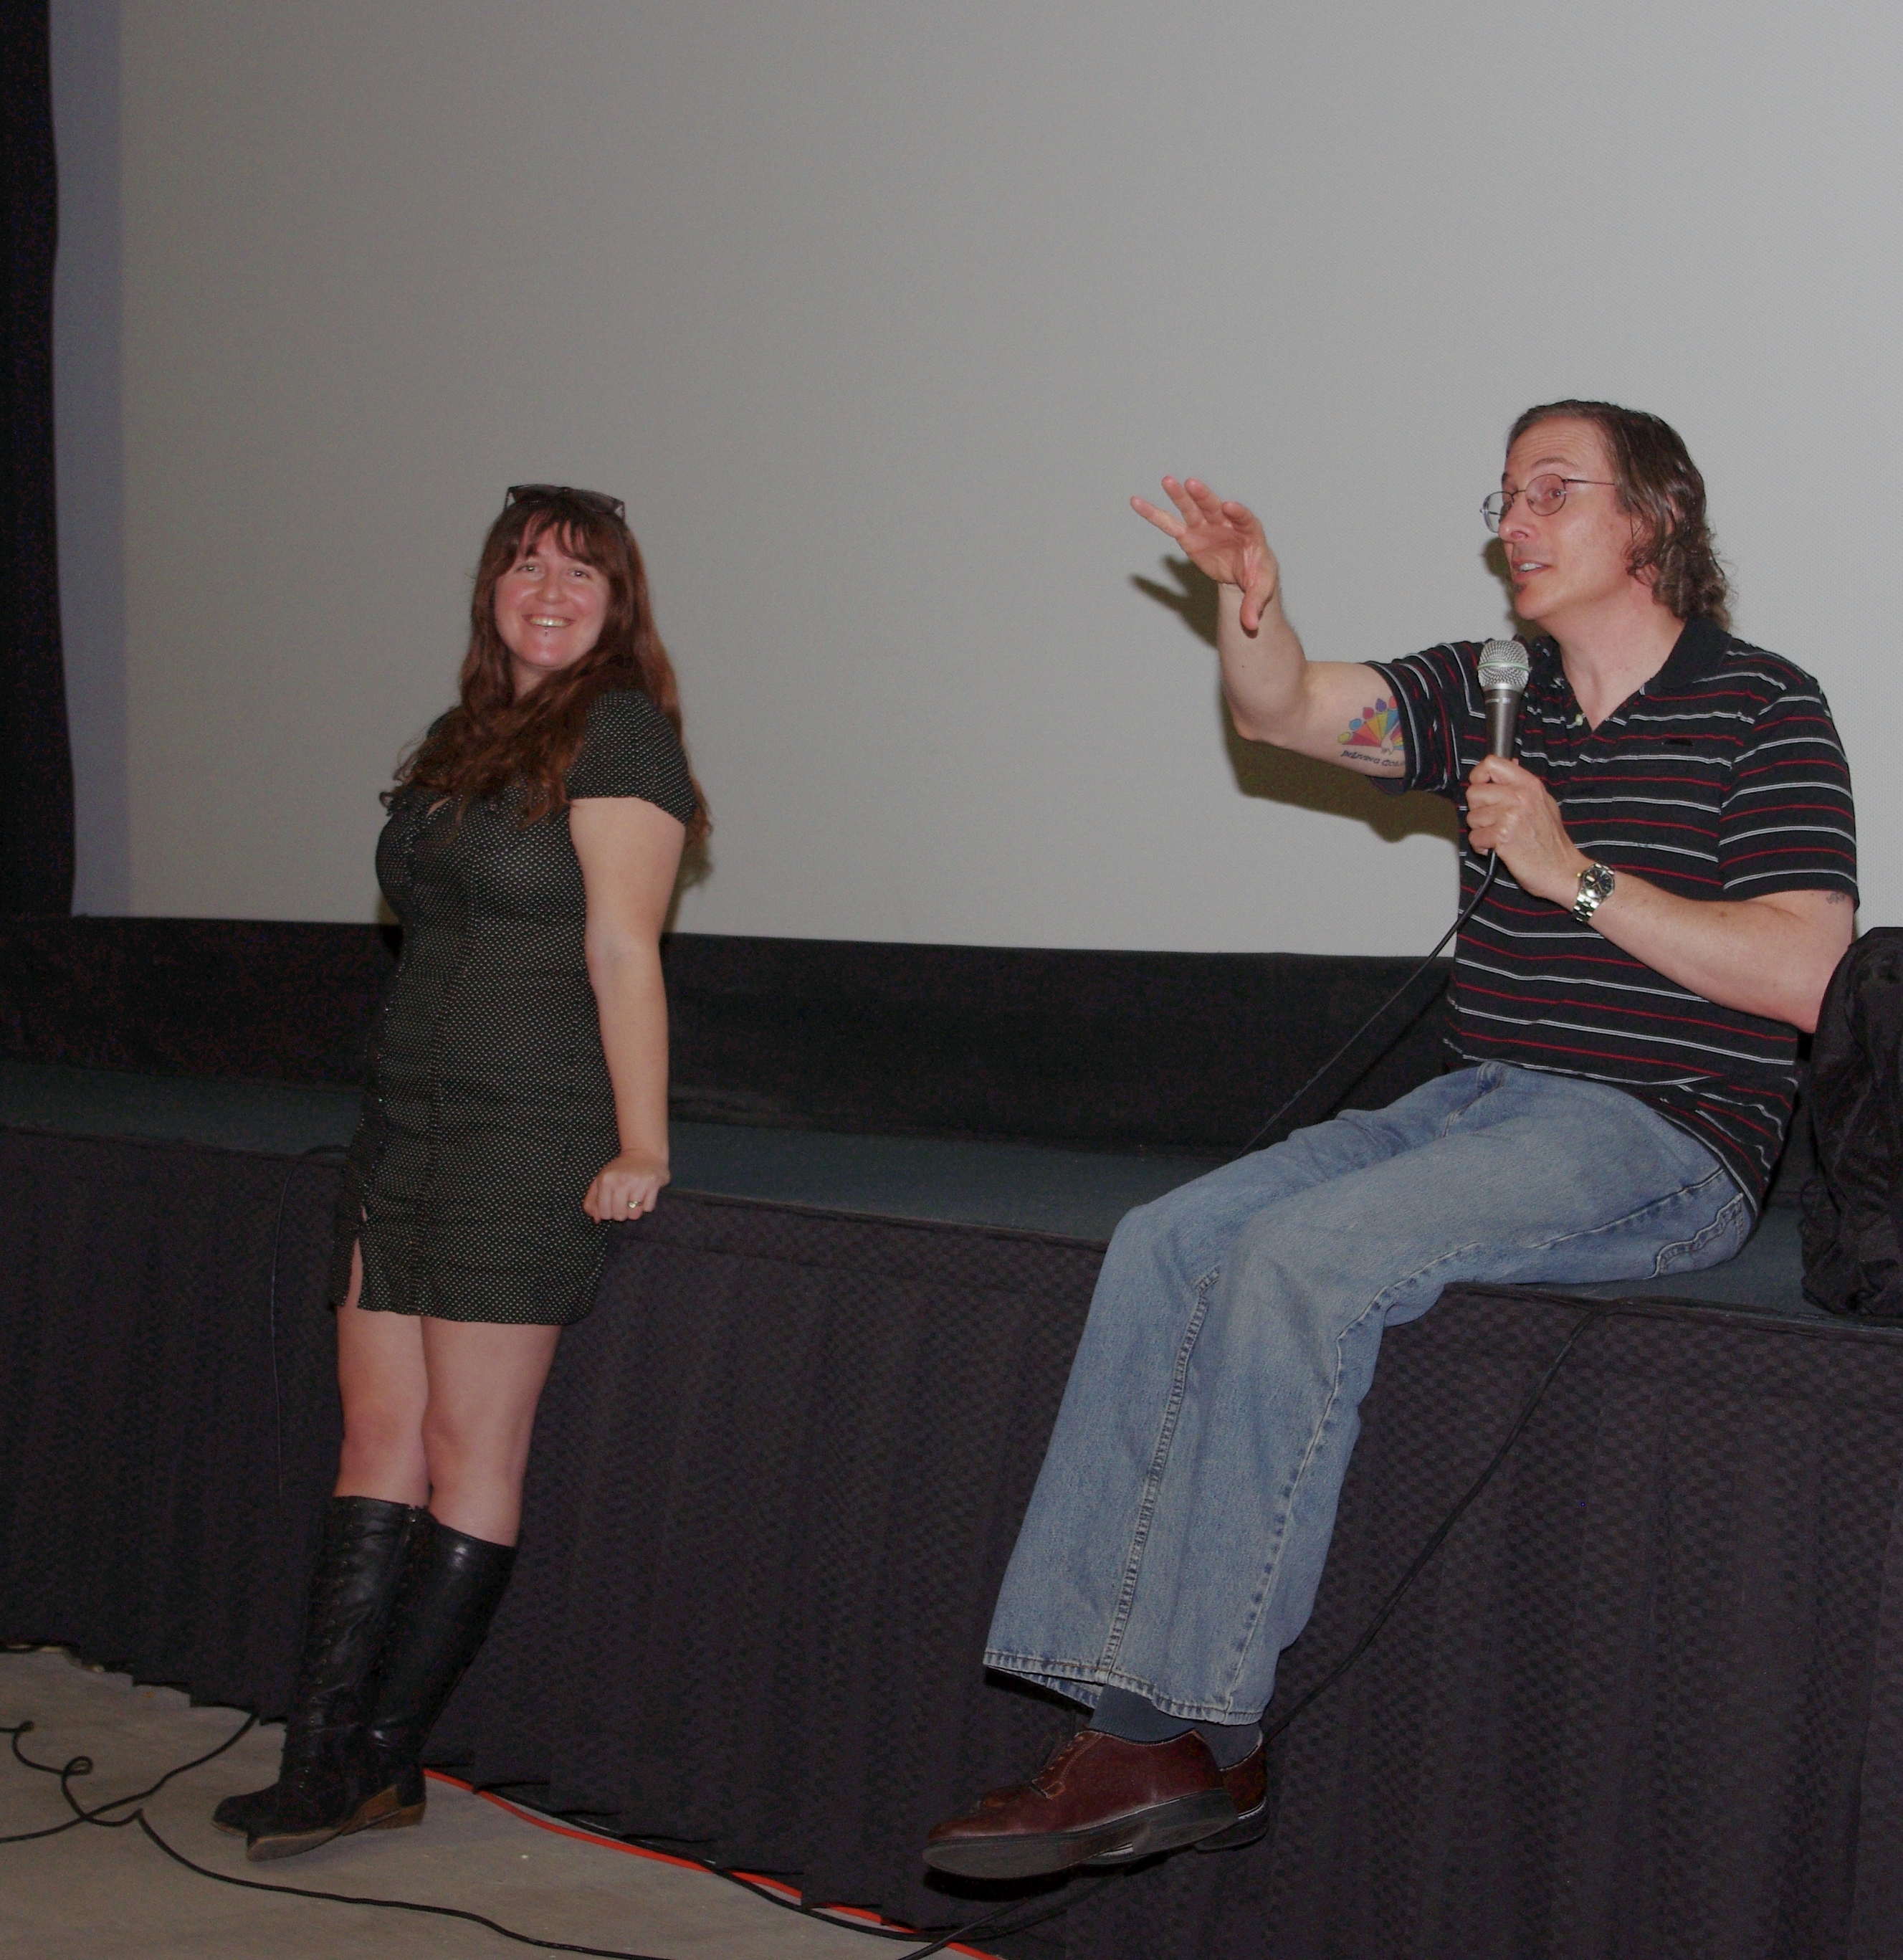 George Pappy at Q&A for The Green Girl premiere at Laemmle Royal Theatre - with editor Amy Glickman Brown (15 March 2014)